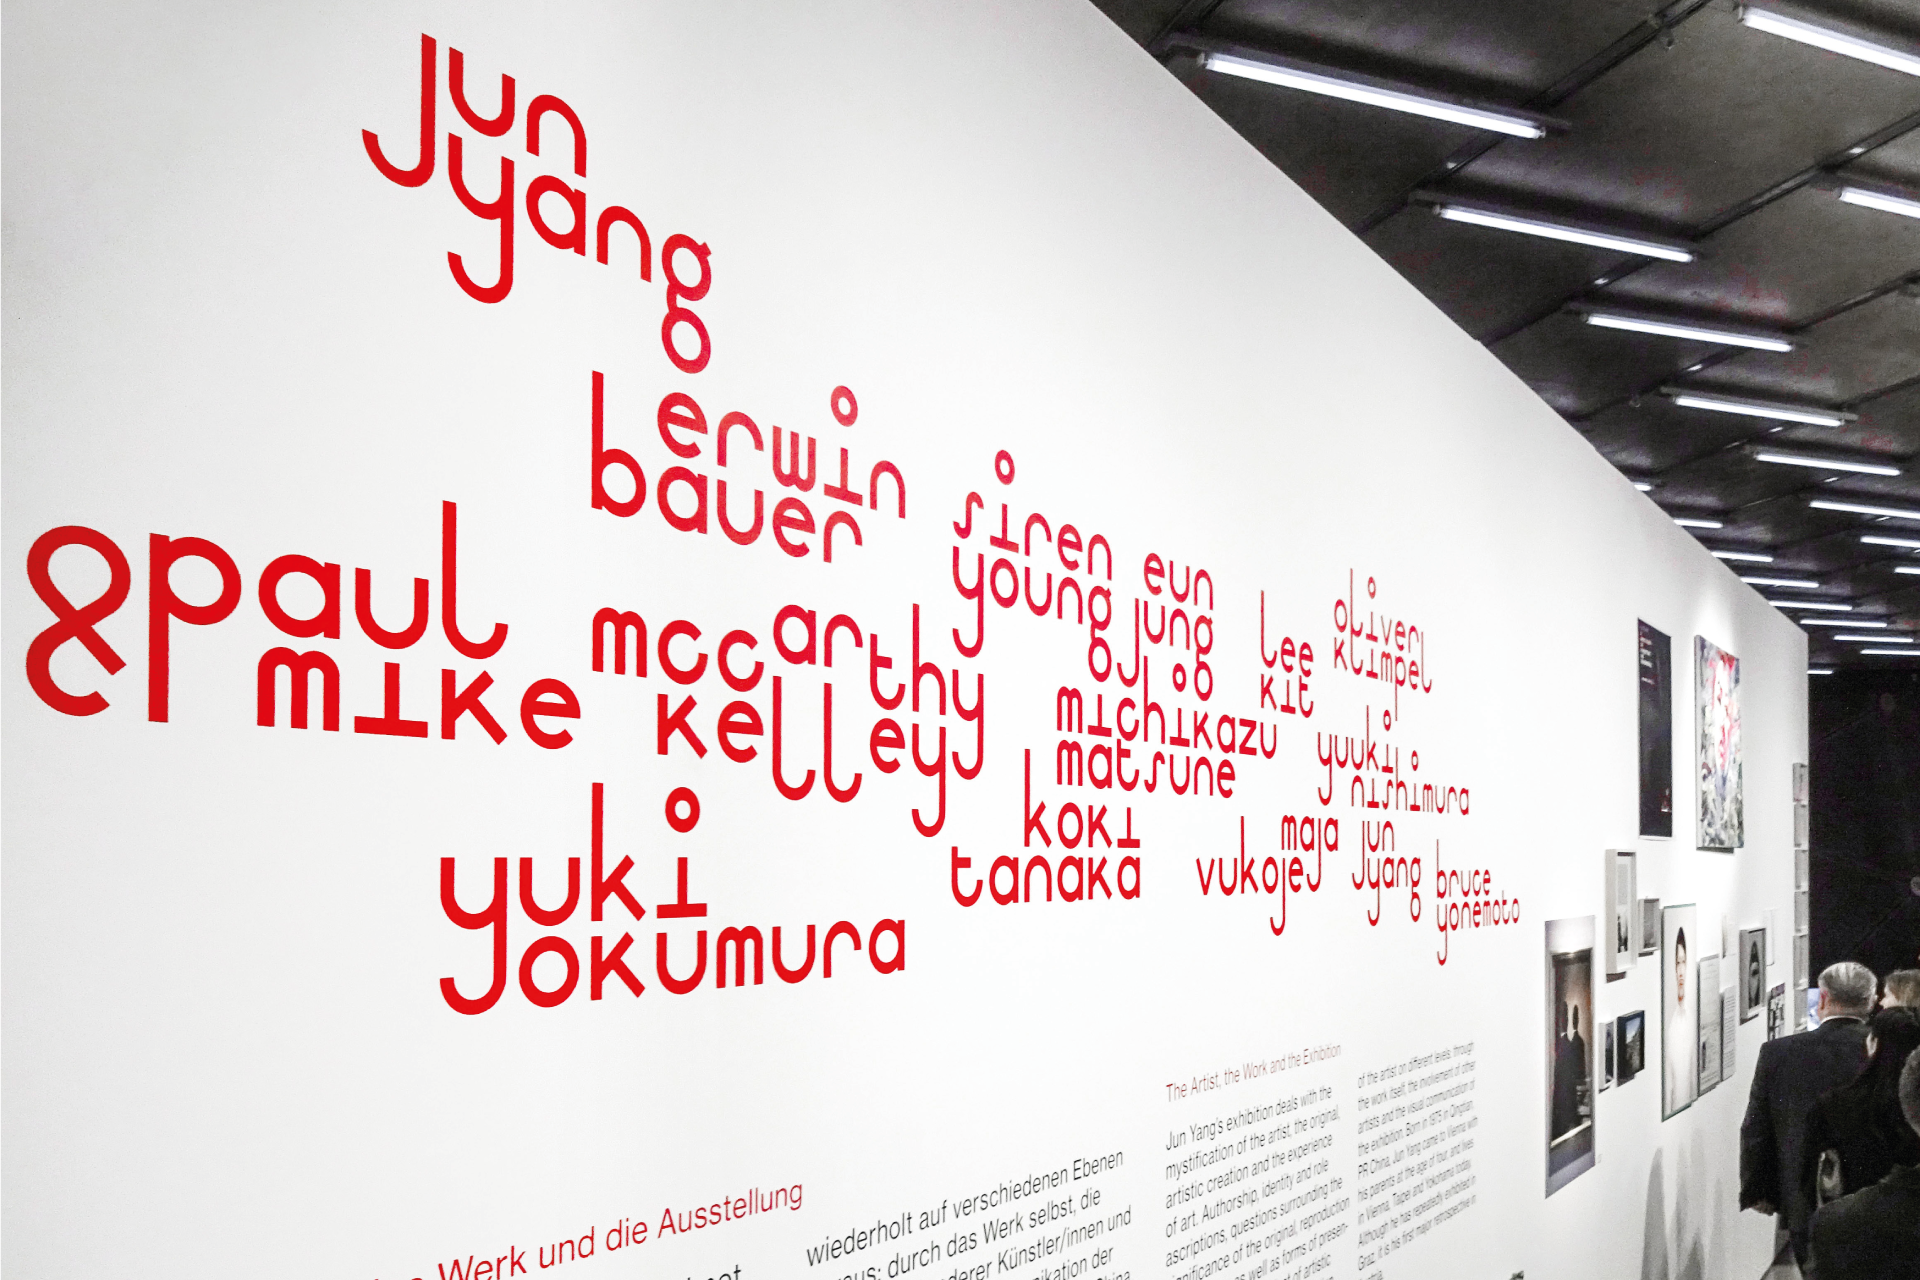 Detail of the exhibition graphics of the Jun Yang exhibition with wall lettering